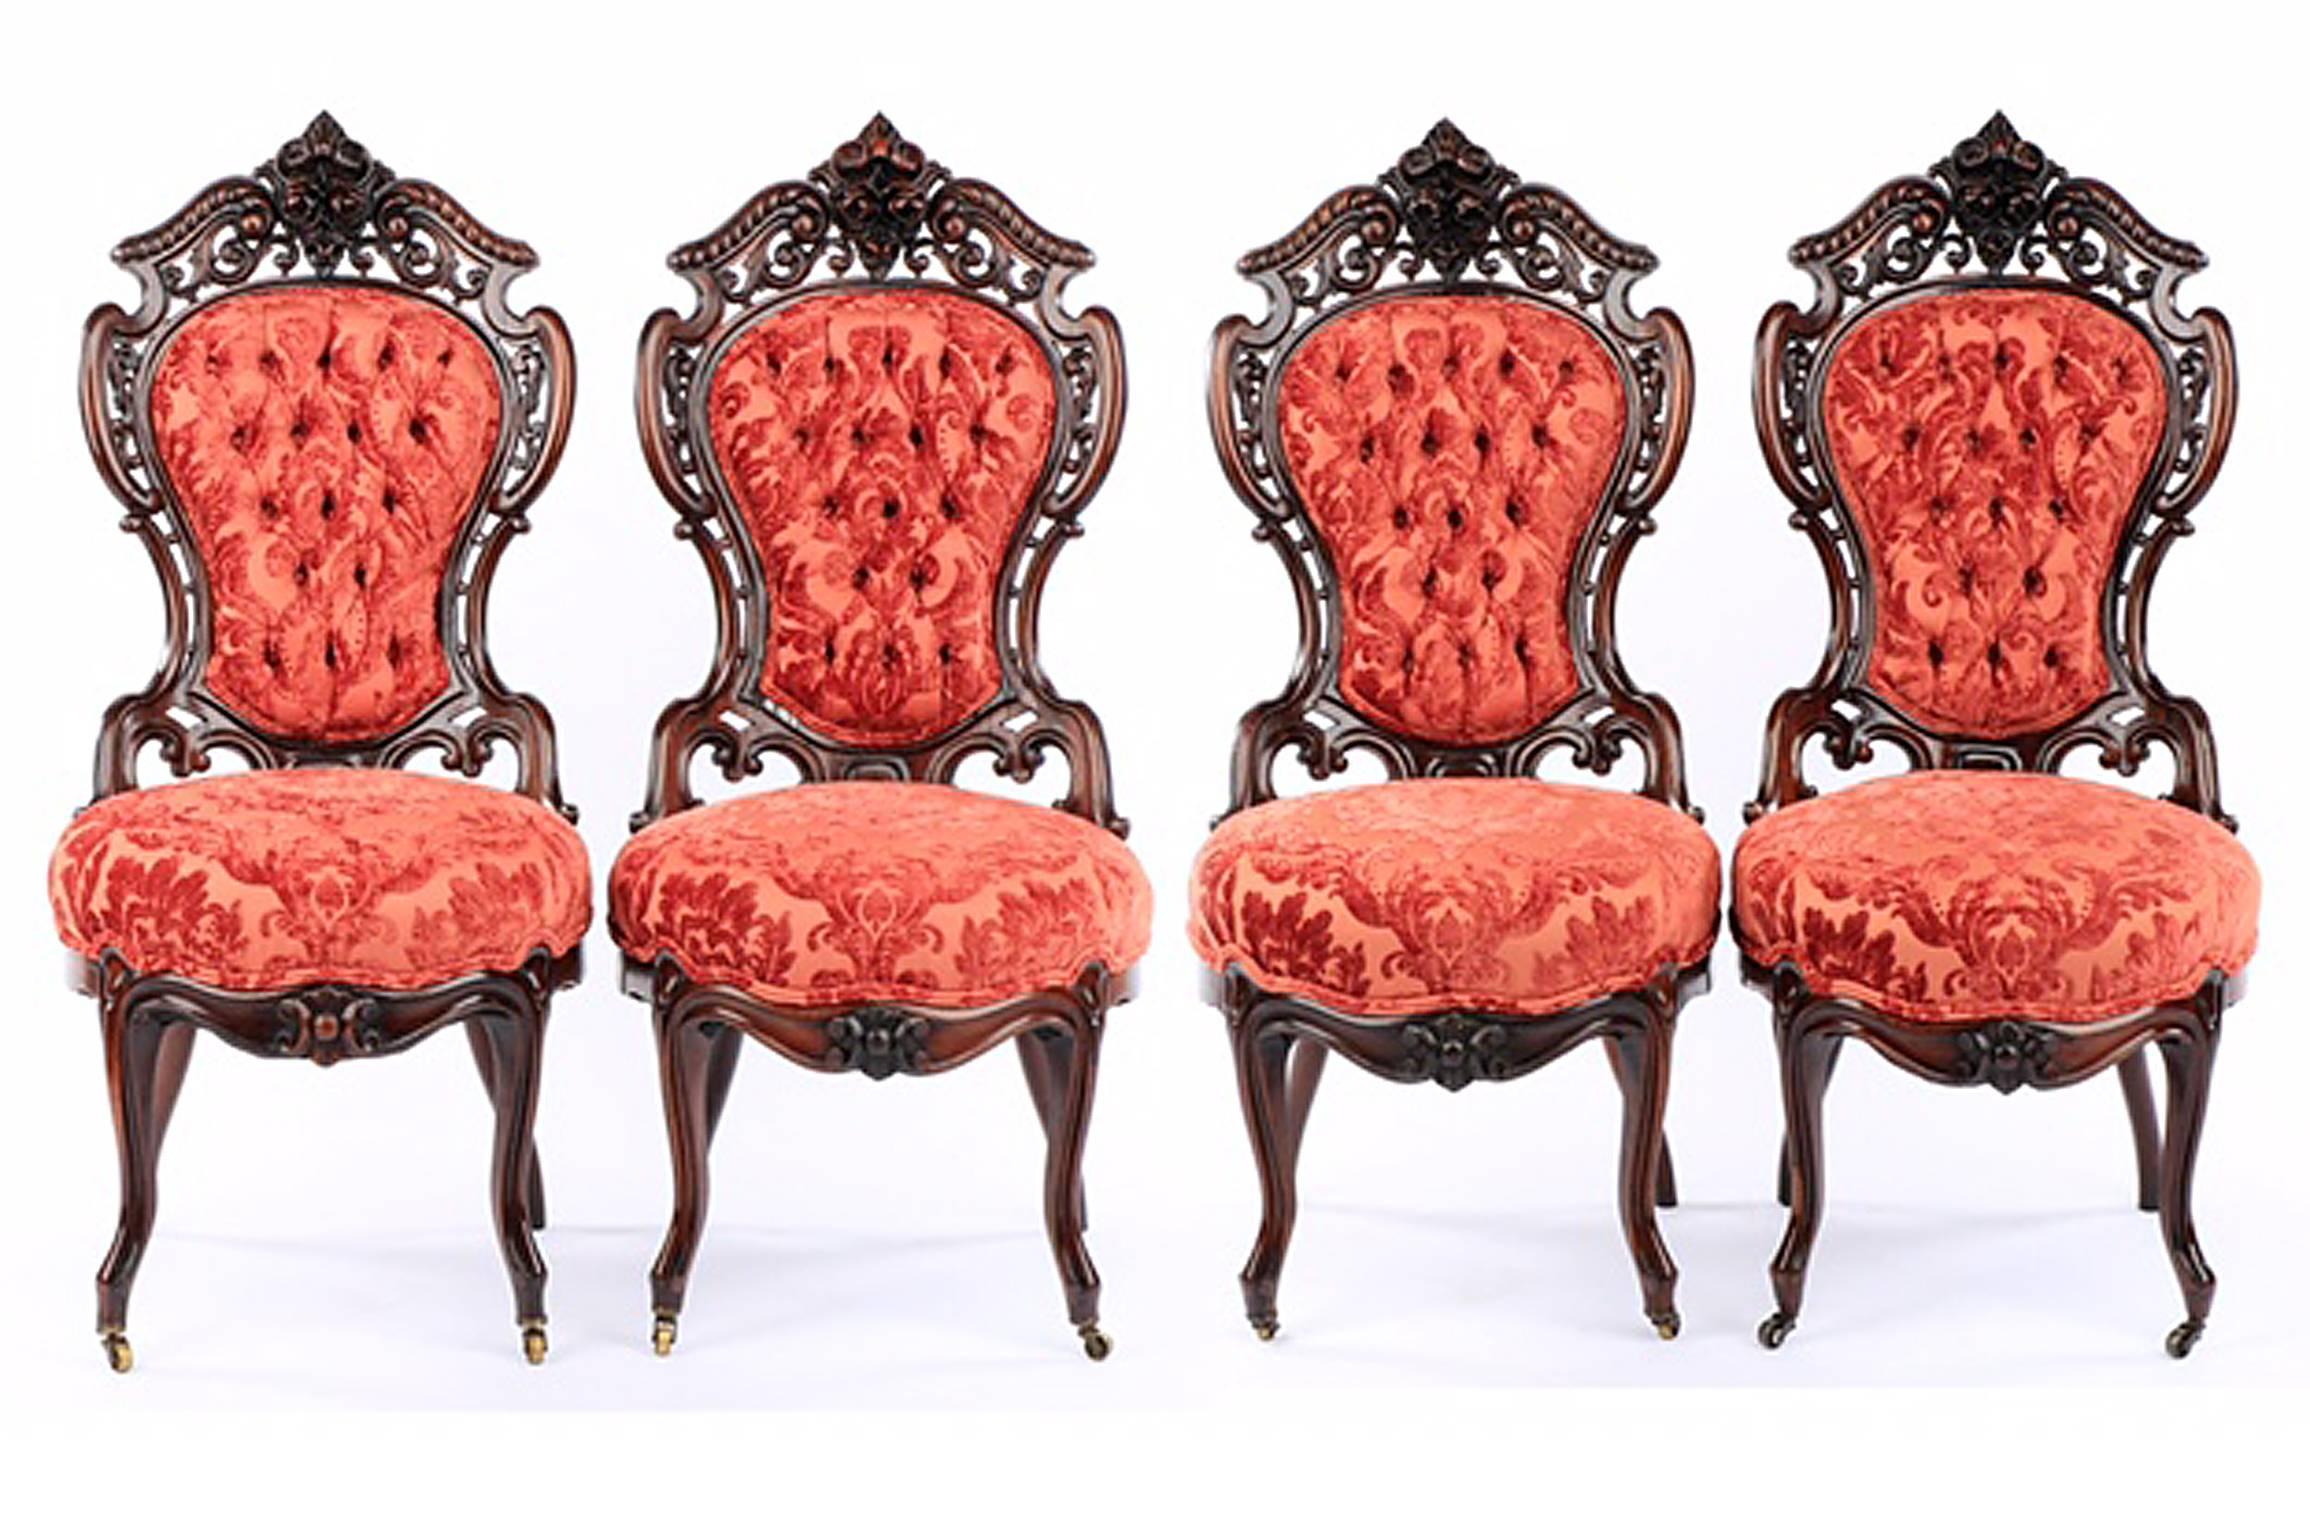 J. & J. W. Meeks (American (New York), 1797-1869), circa 1860. A nine-piece parlor set in the Stanton Hall Pattern comprising six chairs (two arm, four side), one settee and two recamiers, each piece decorated with high relief carving, crests with